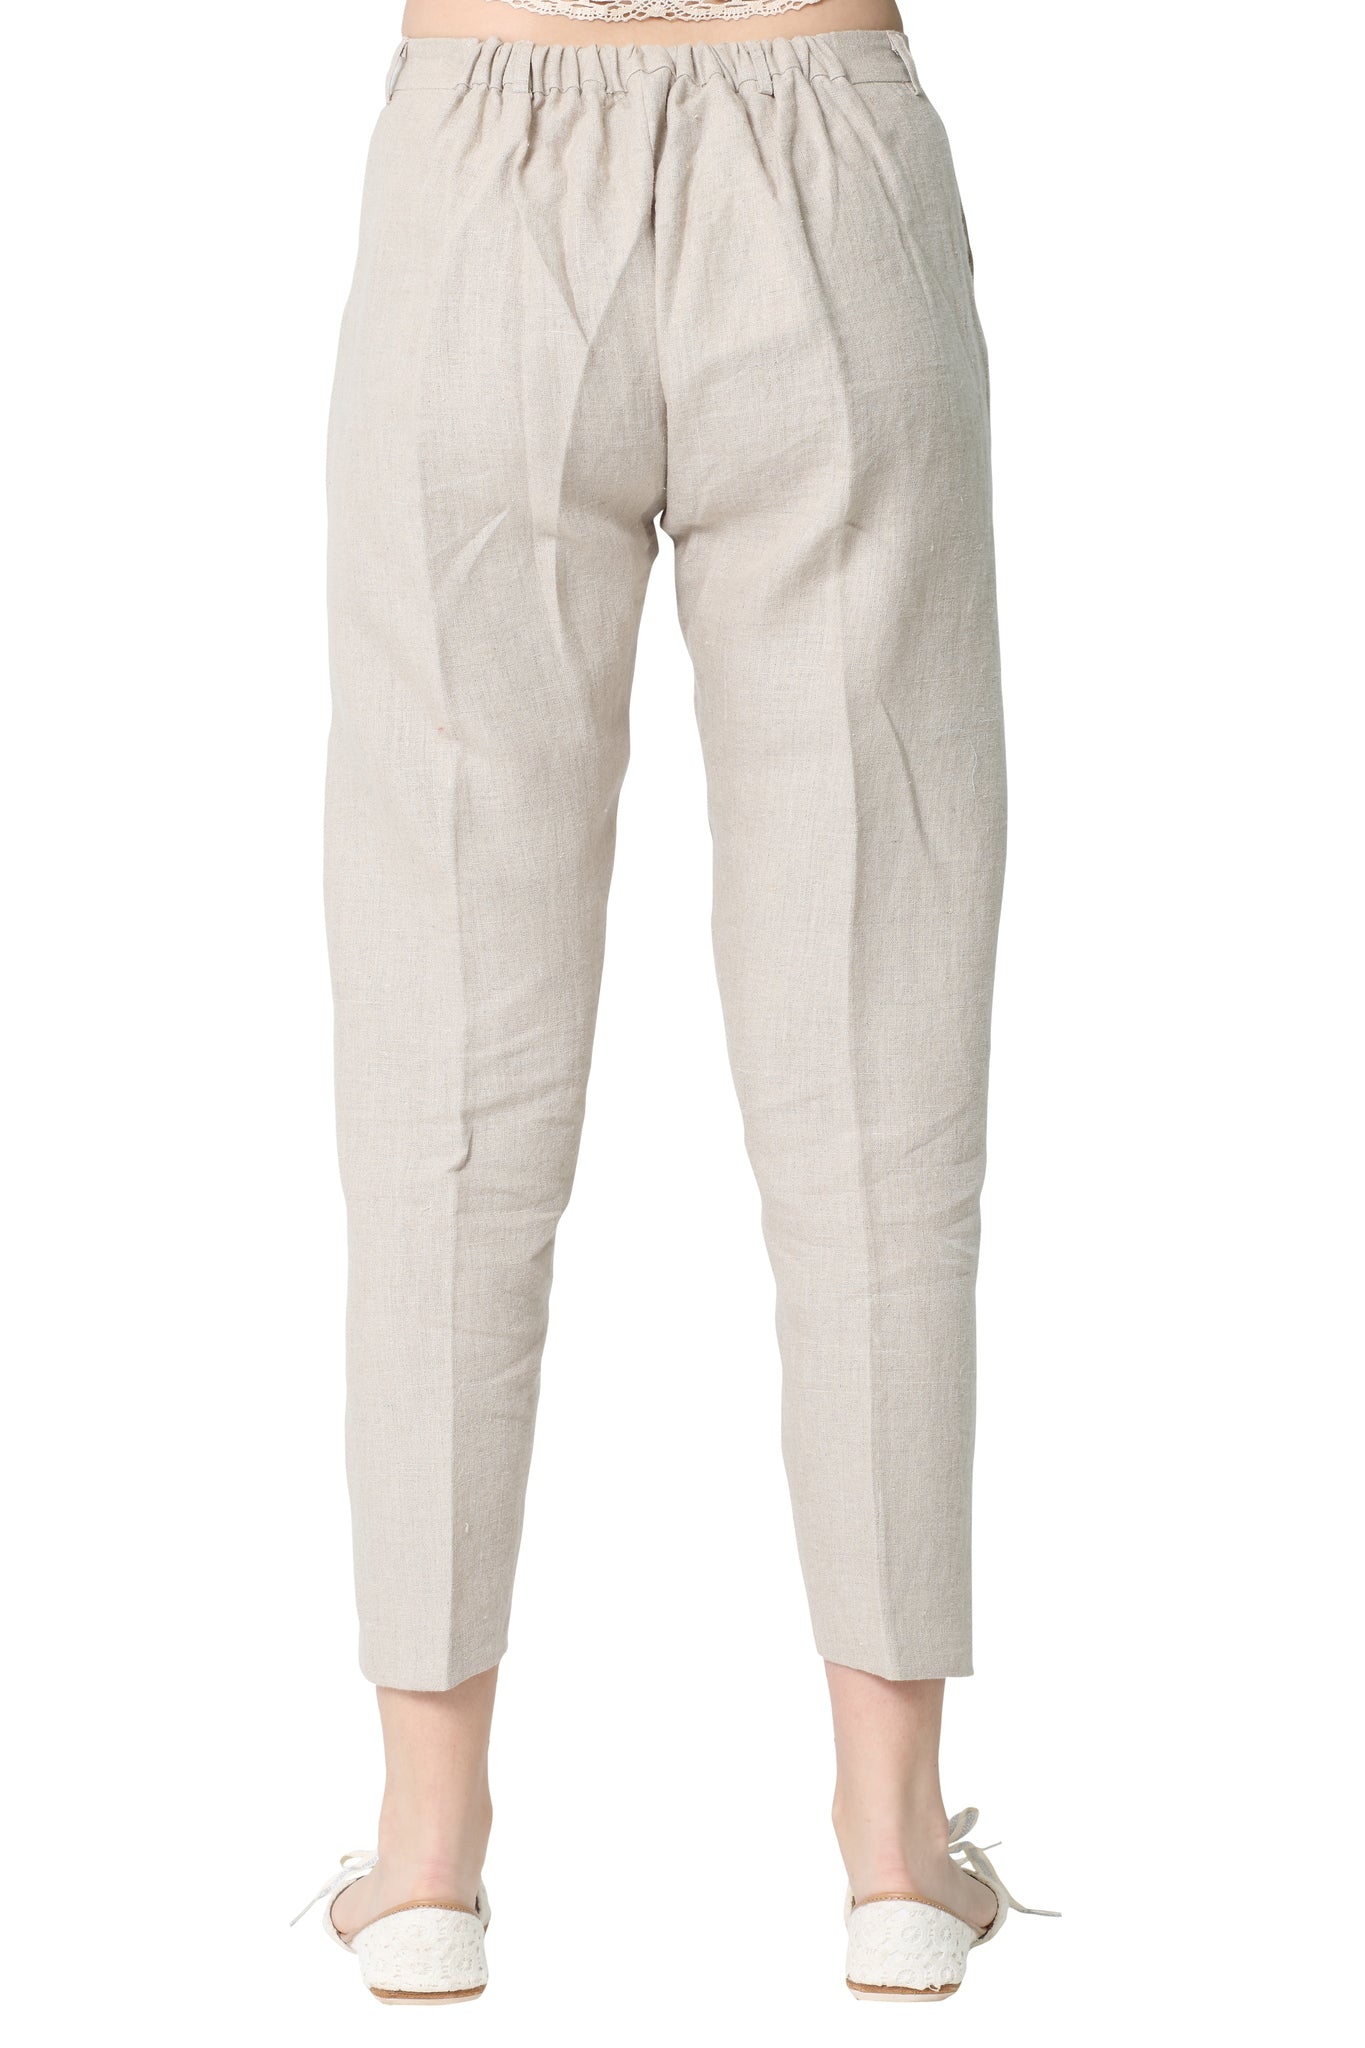 Linen and Linens - Natural Ankle Grazer Pants - 4